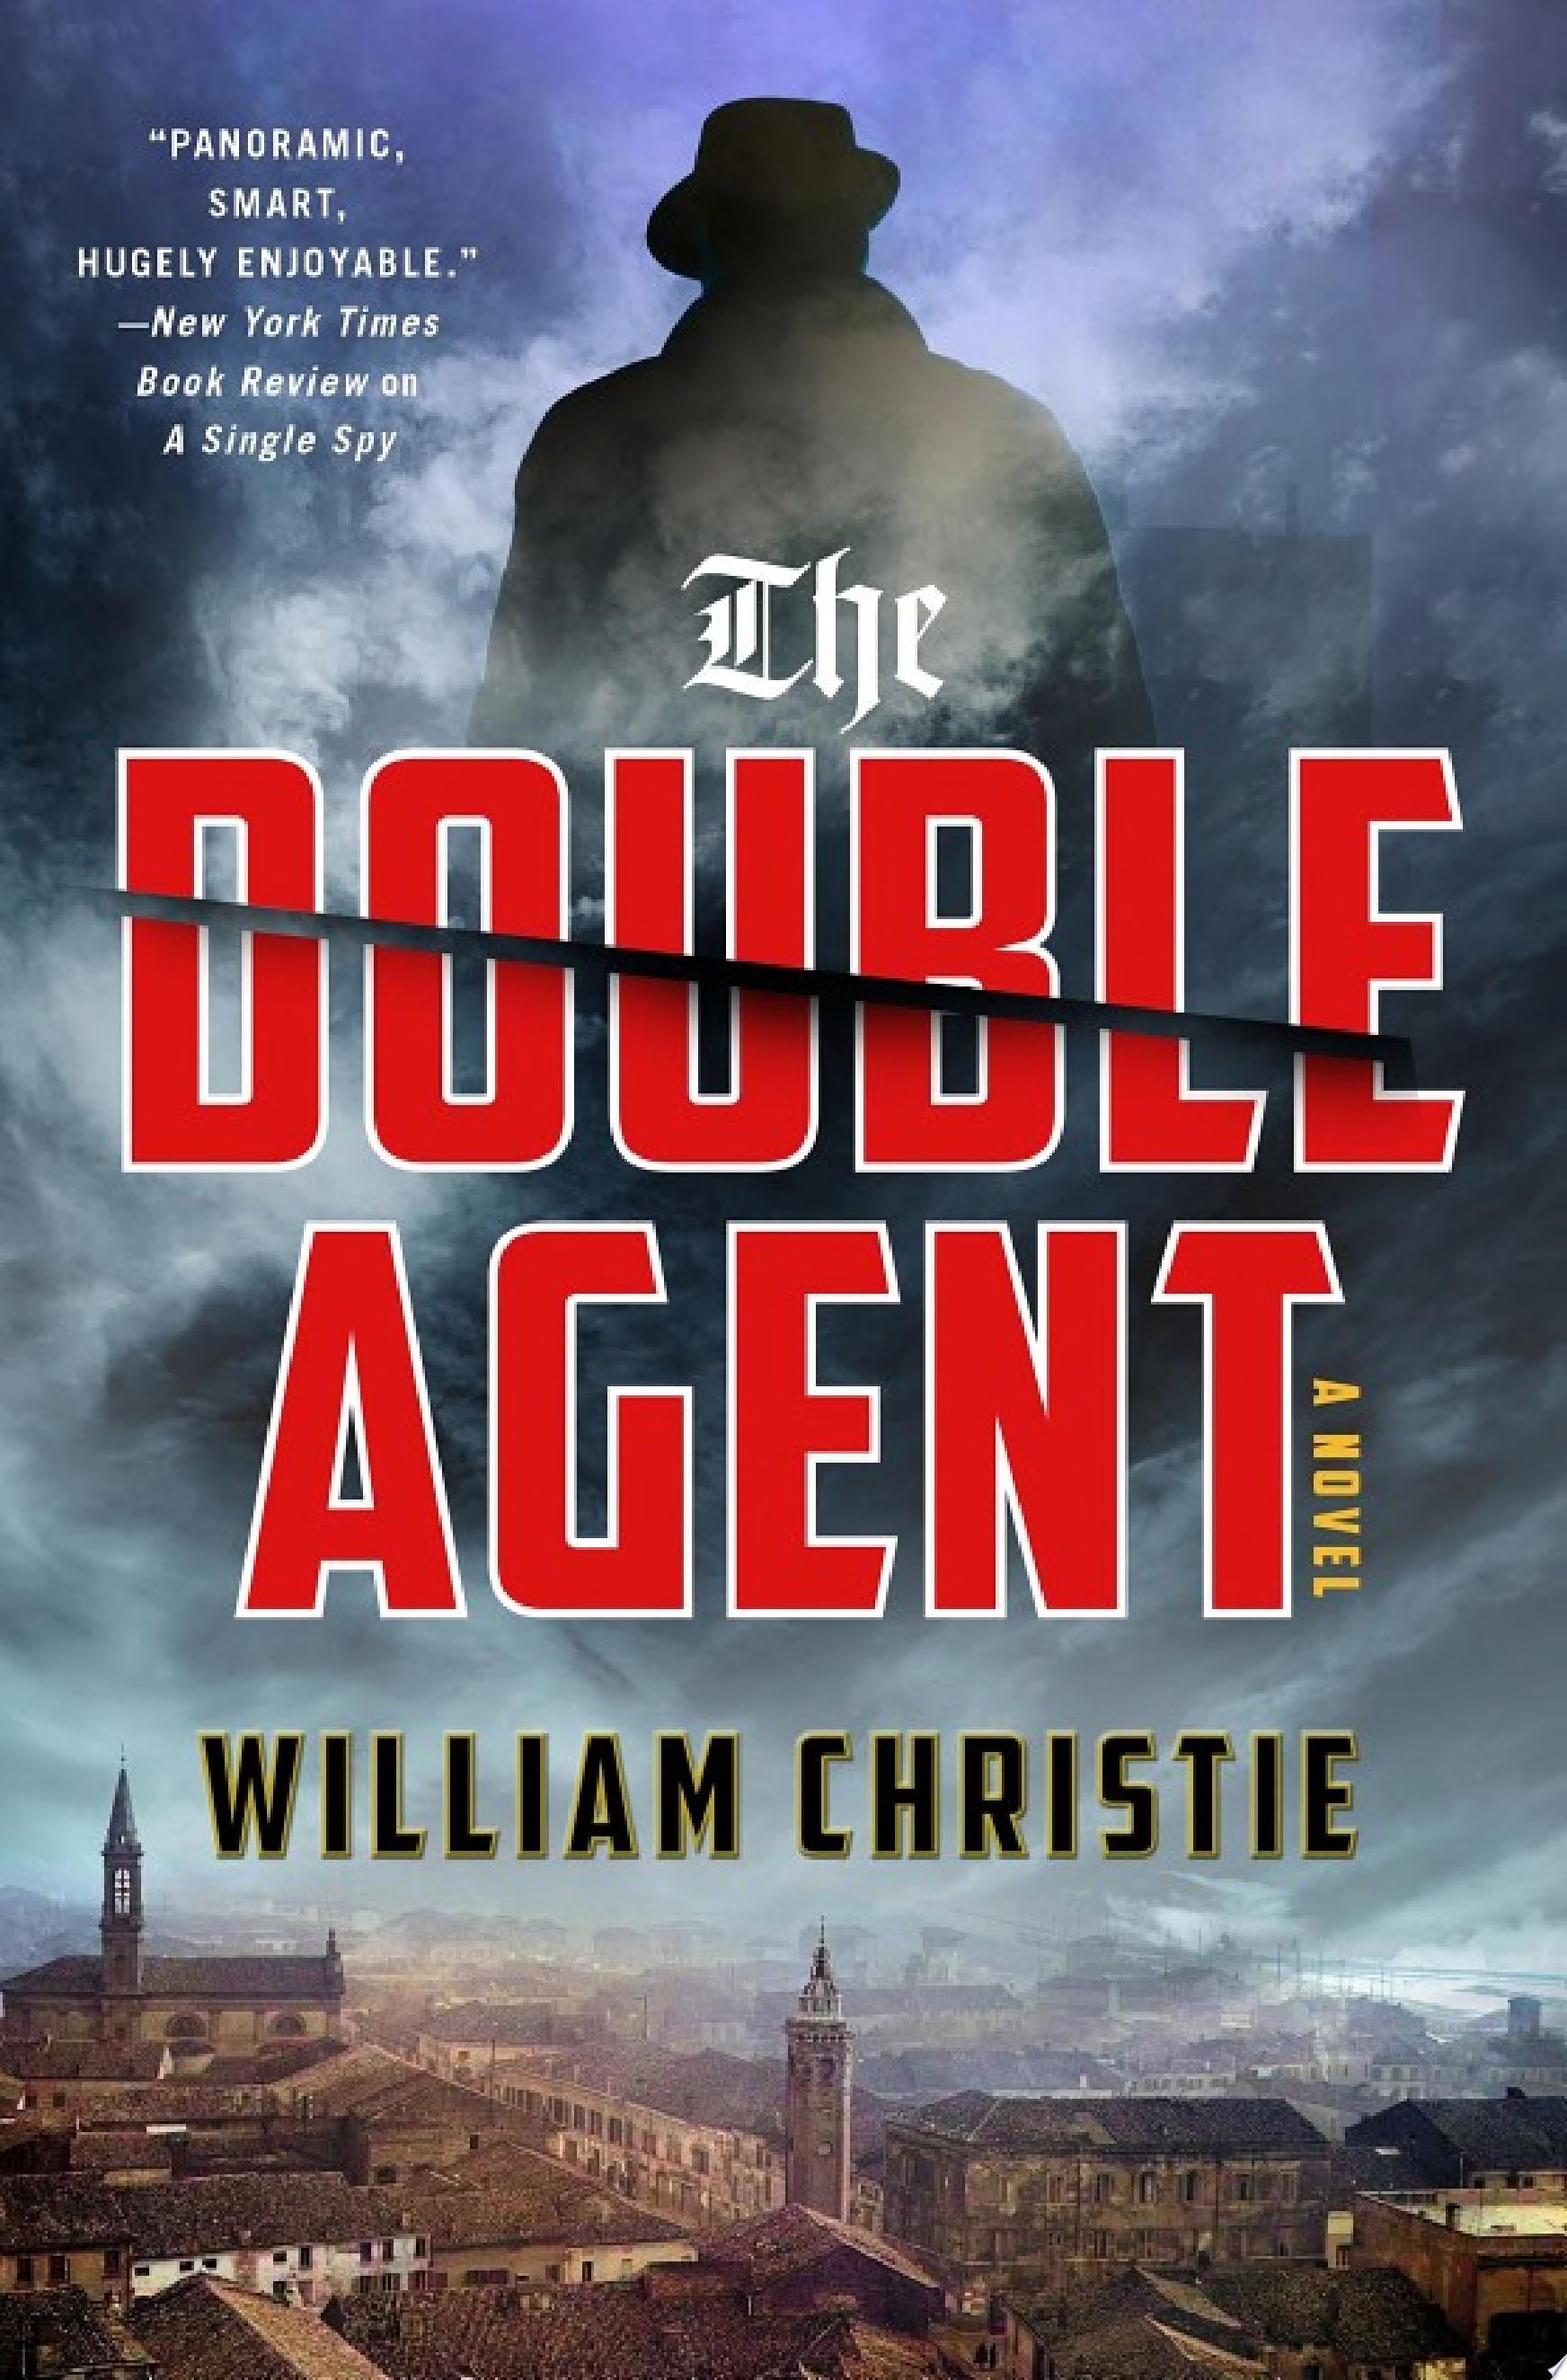 Image for "The Double Agent"